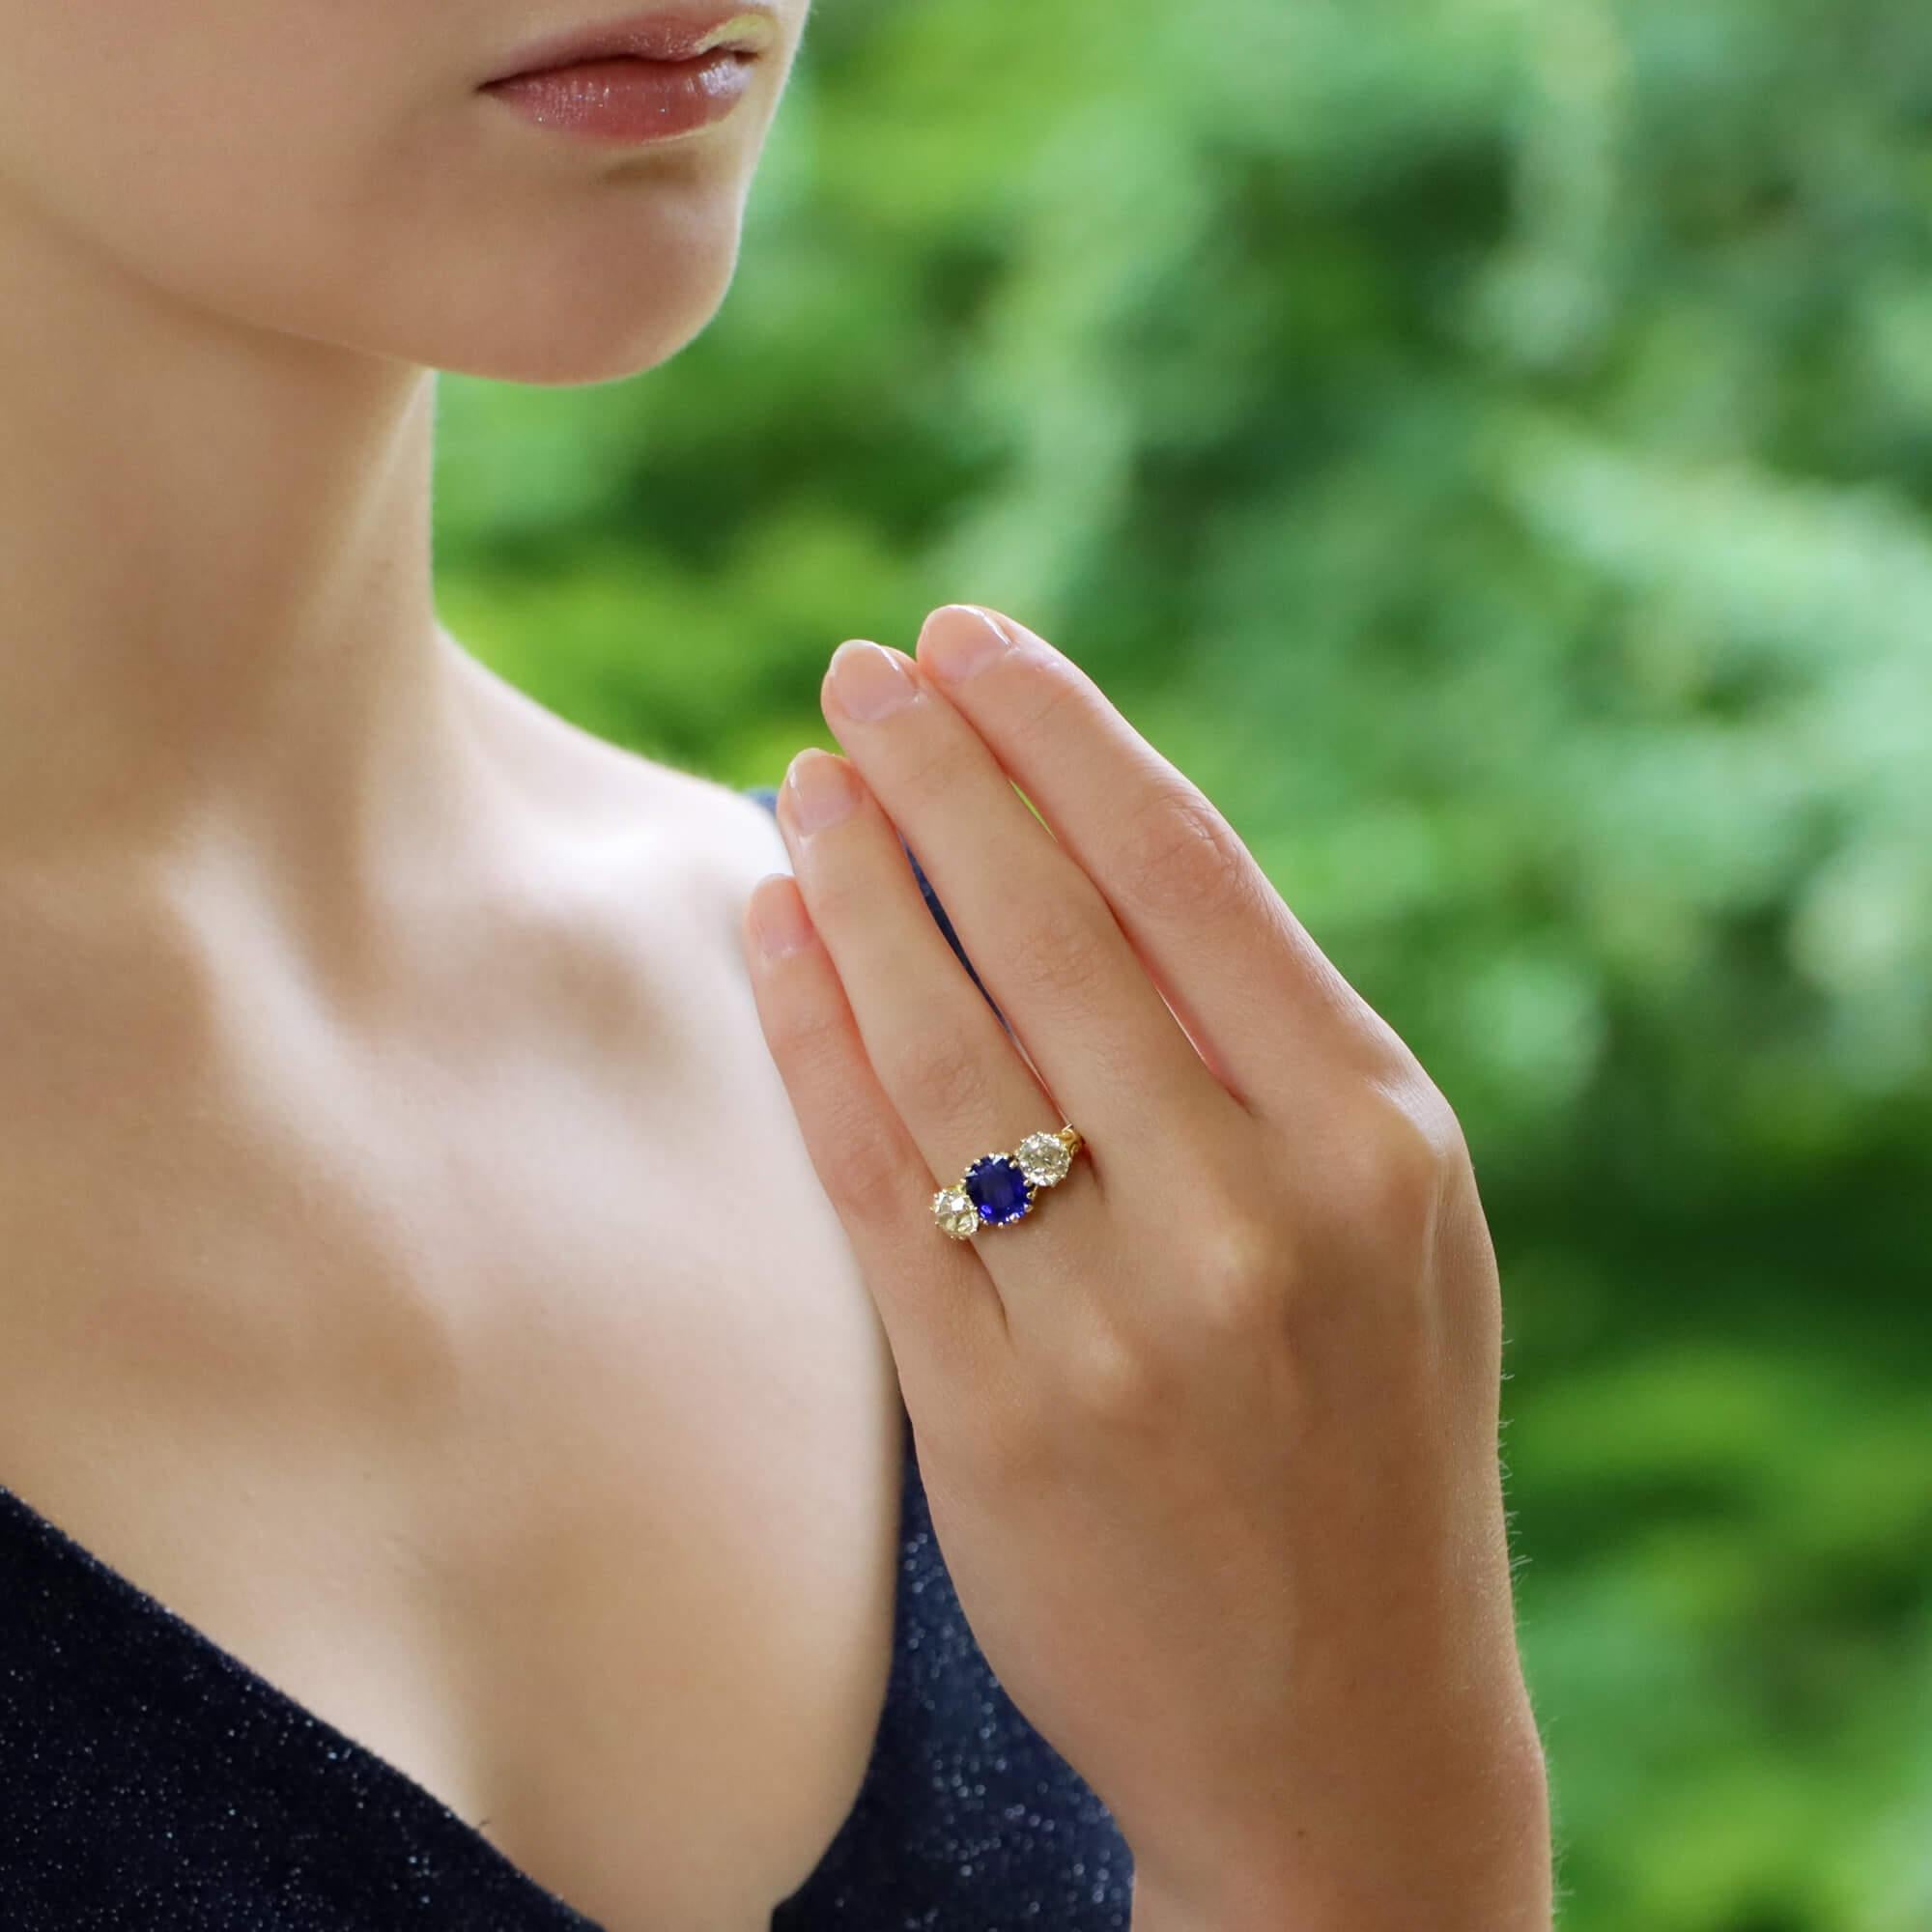 A Victorian sapphire and diamond three-stone engagement ring set in 18 karat yellow gold. 

The ring centrally features an elongated cushion-cut cornflower blue sapphire set with multiple yellow gold claws. The sapphire is then flanked on each side